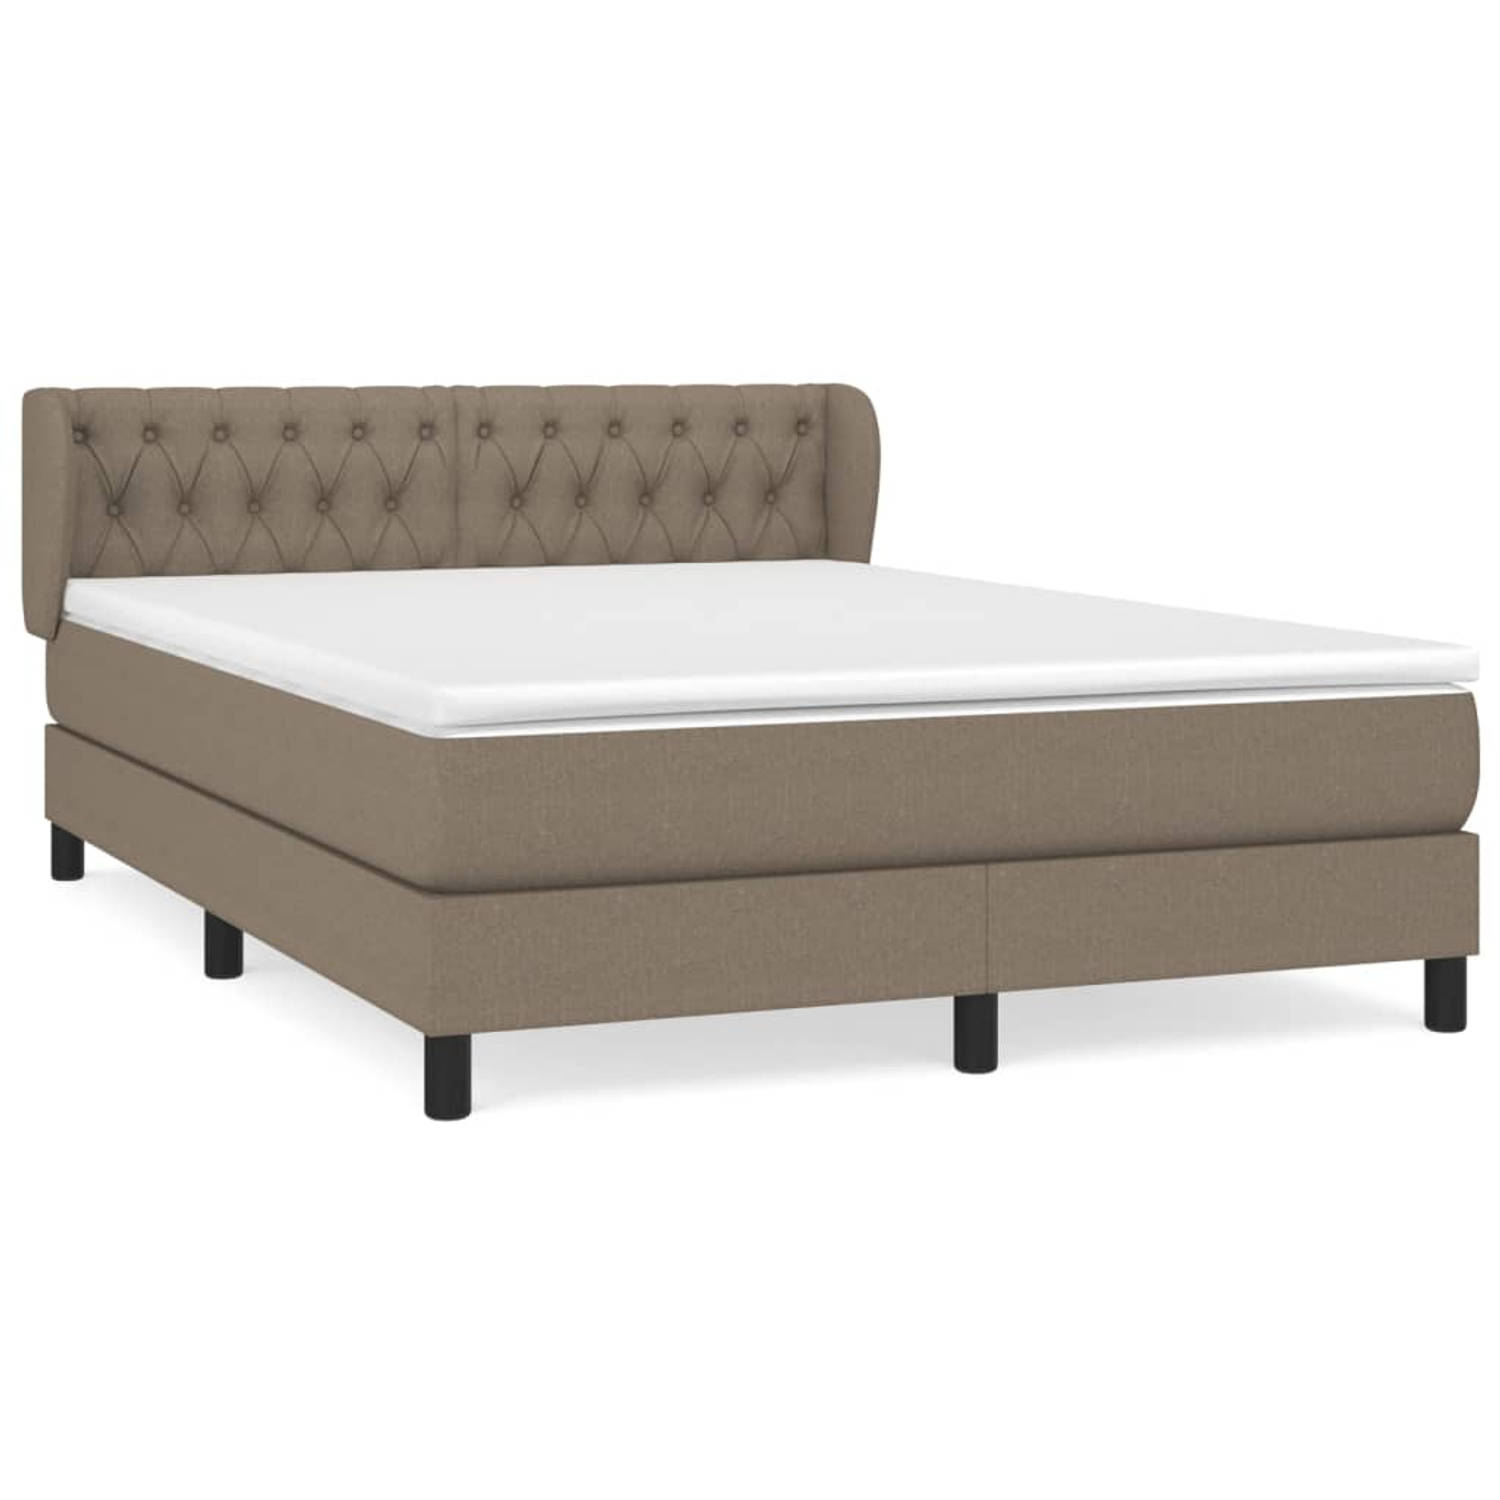 The Living Store Boxspringbed - Comfort - Bed 203x147x78/88 cm - Taupe